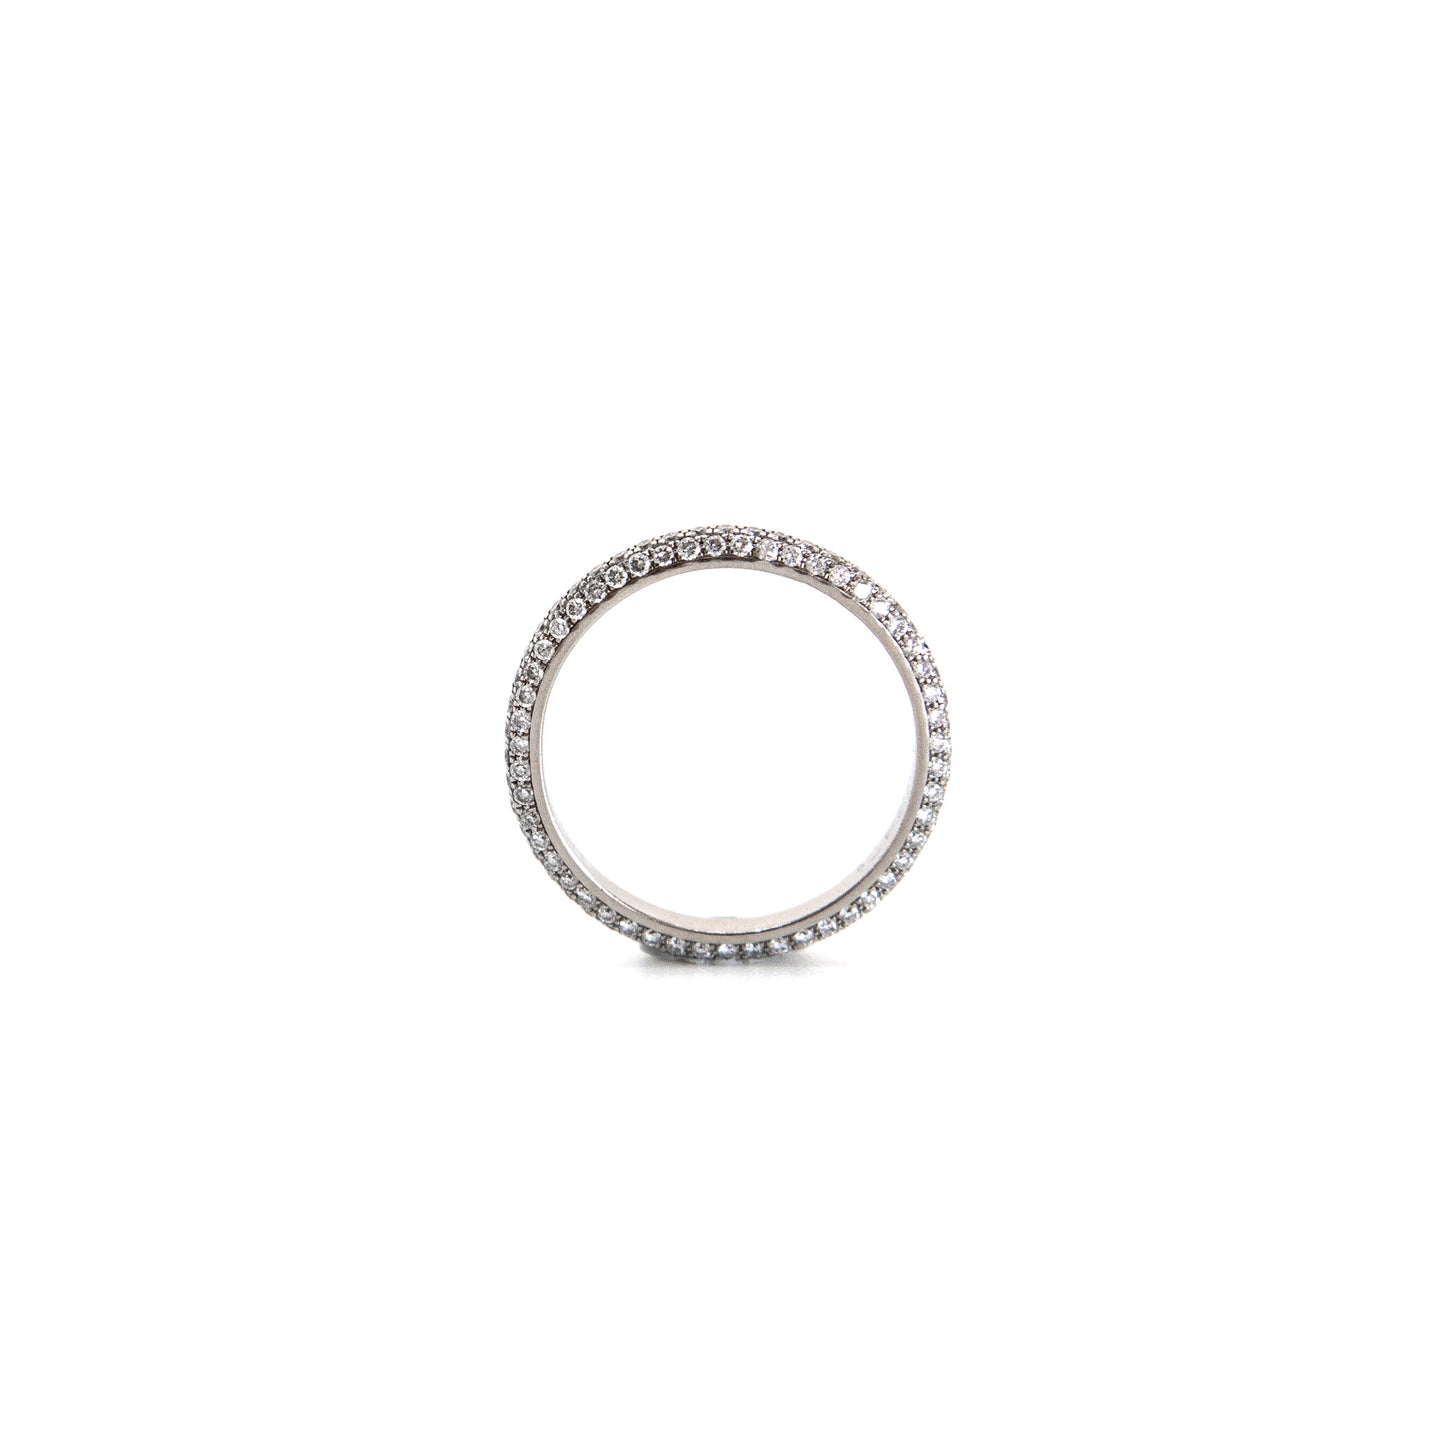 Delicate diamond wedding ring, micropave ring